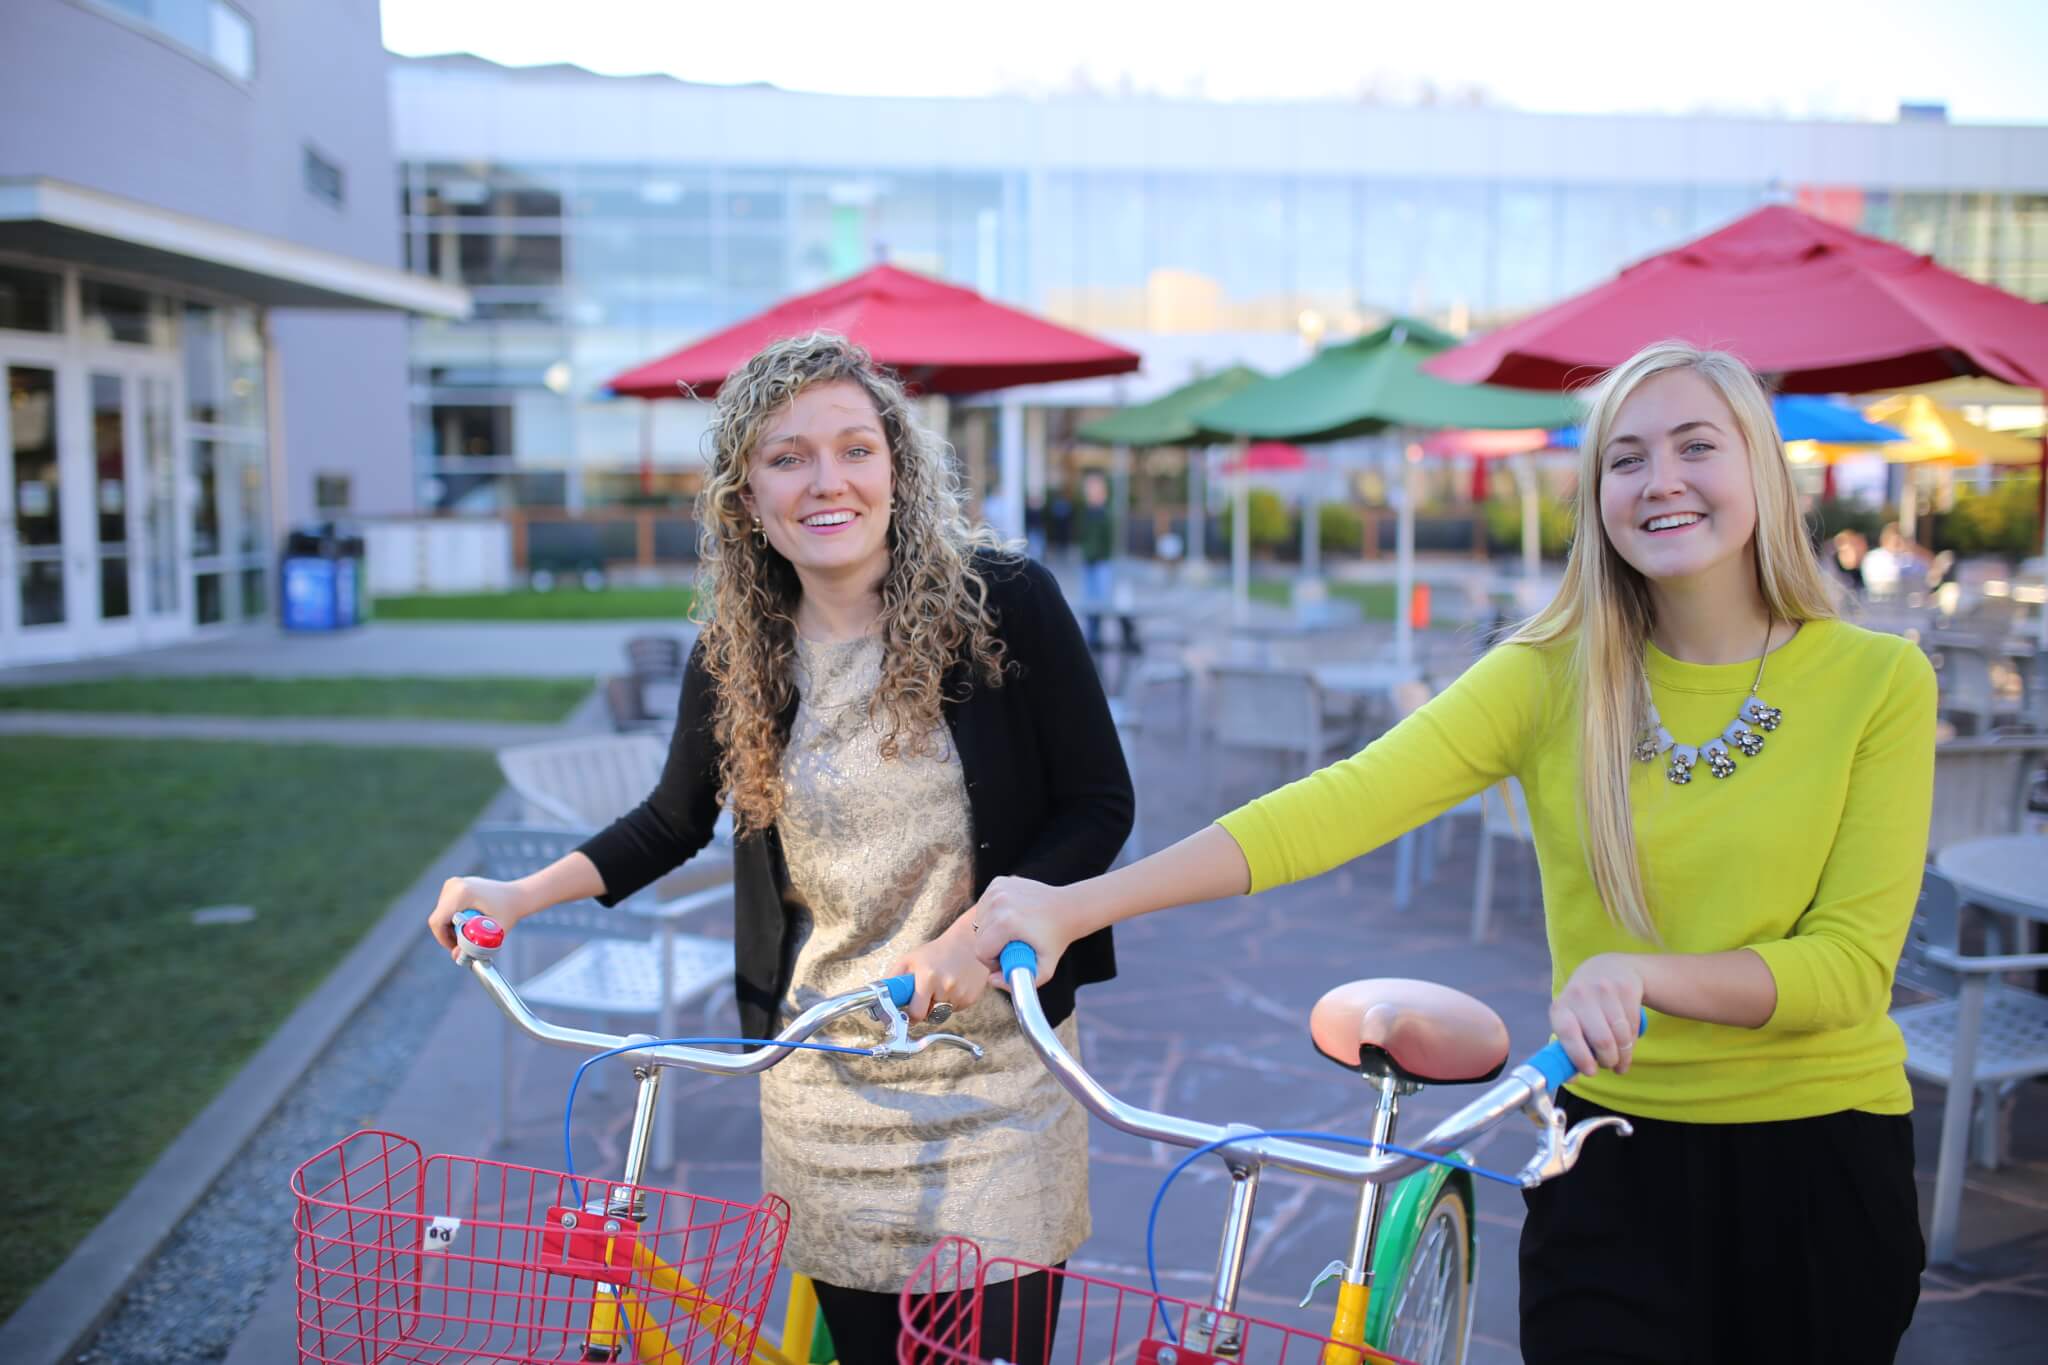 Mackenzie Thomas and Jane Hall stand next to bicycles at the Googleplex in California